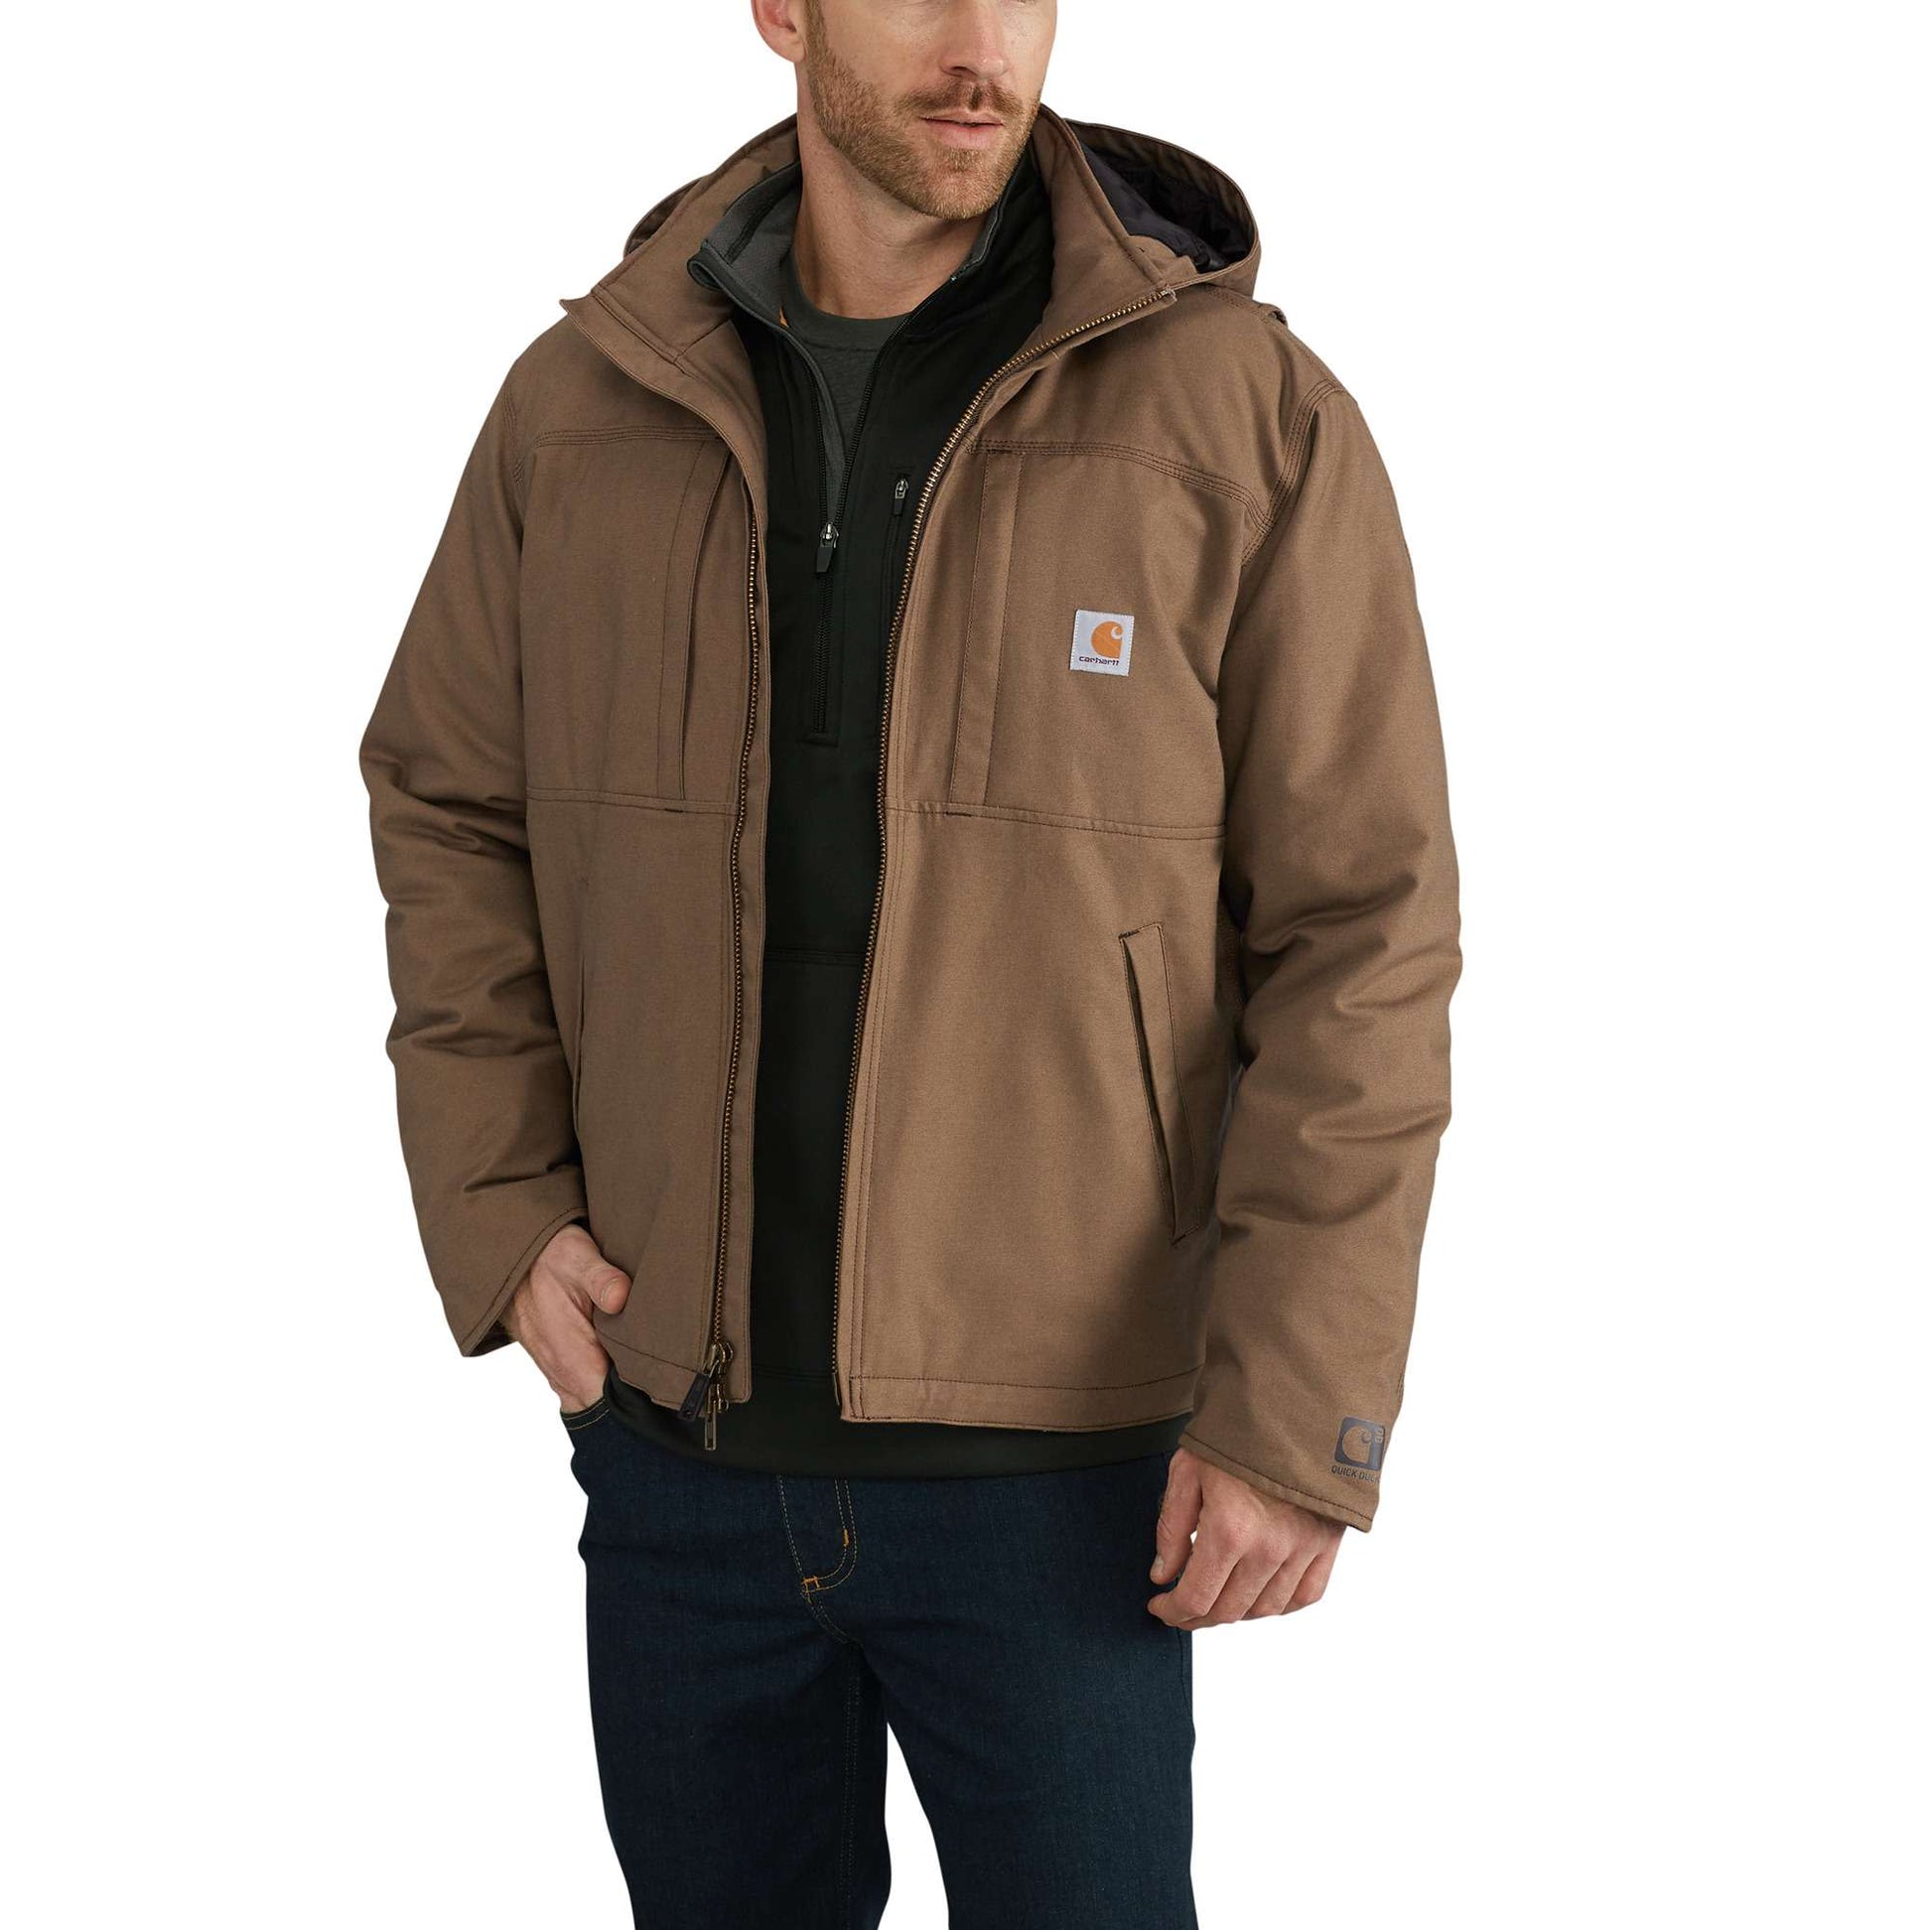 Full Swing® Loose Fit Quick Duck Insulated Jacket - 3 Warmest